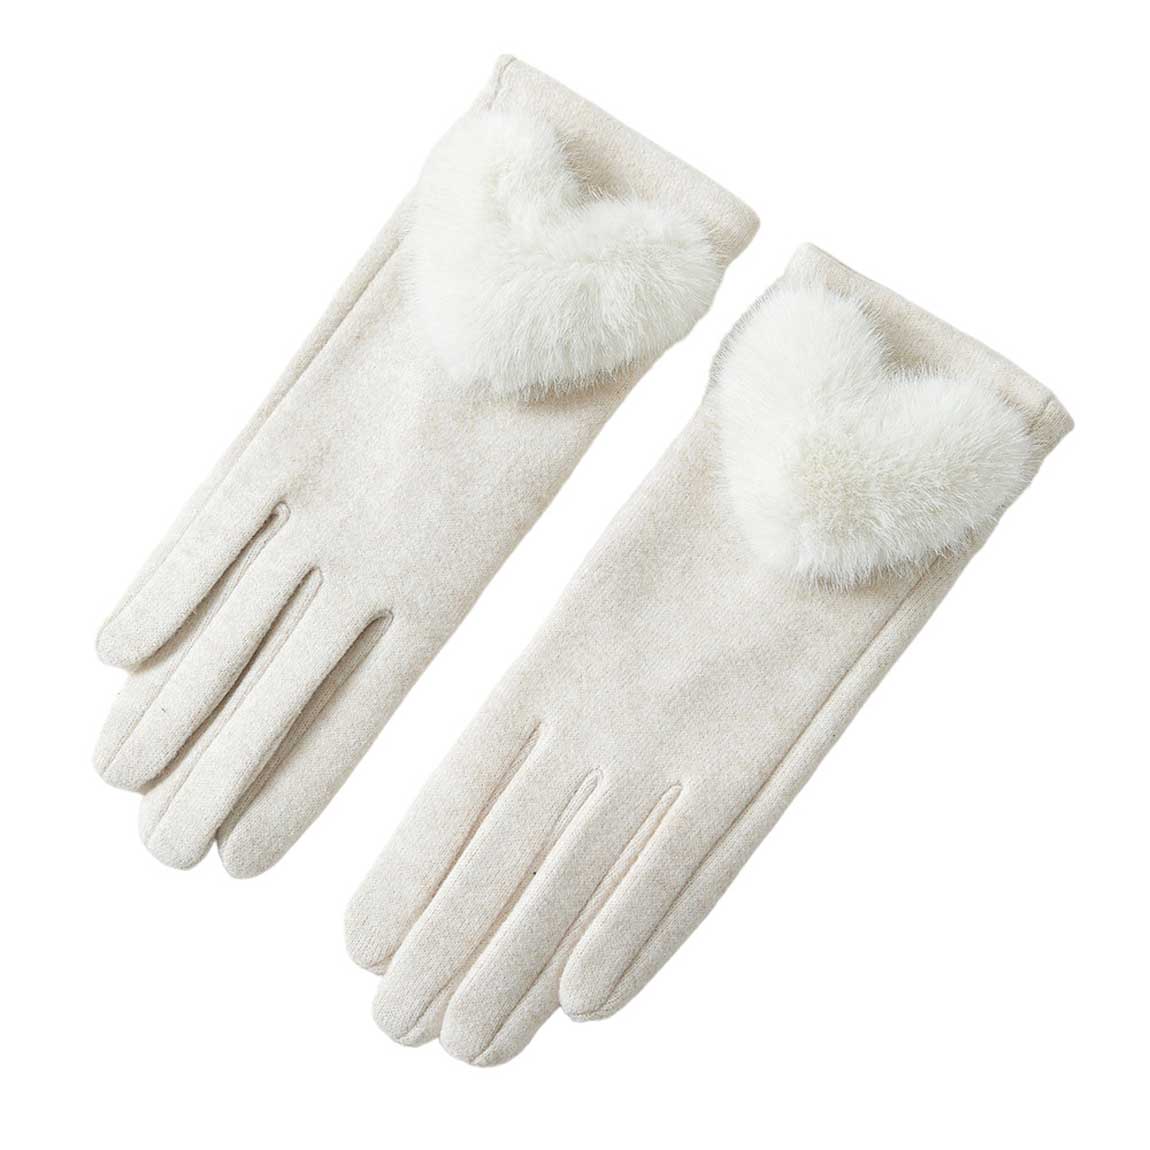 Beige Faux Fur Heart Accented Touch Smart Gloves. It's very fashionable, attractive, and cute looking that will save you from cold and chill on cold days. It will allow you to easily use your electronic devices and touchscreens while keeping your fingers covered! Awesome gift for your family, friends, anyone you love. 